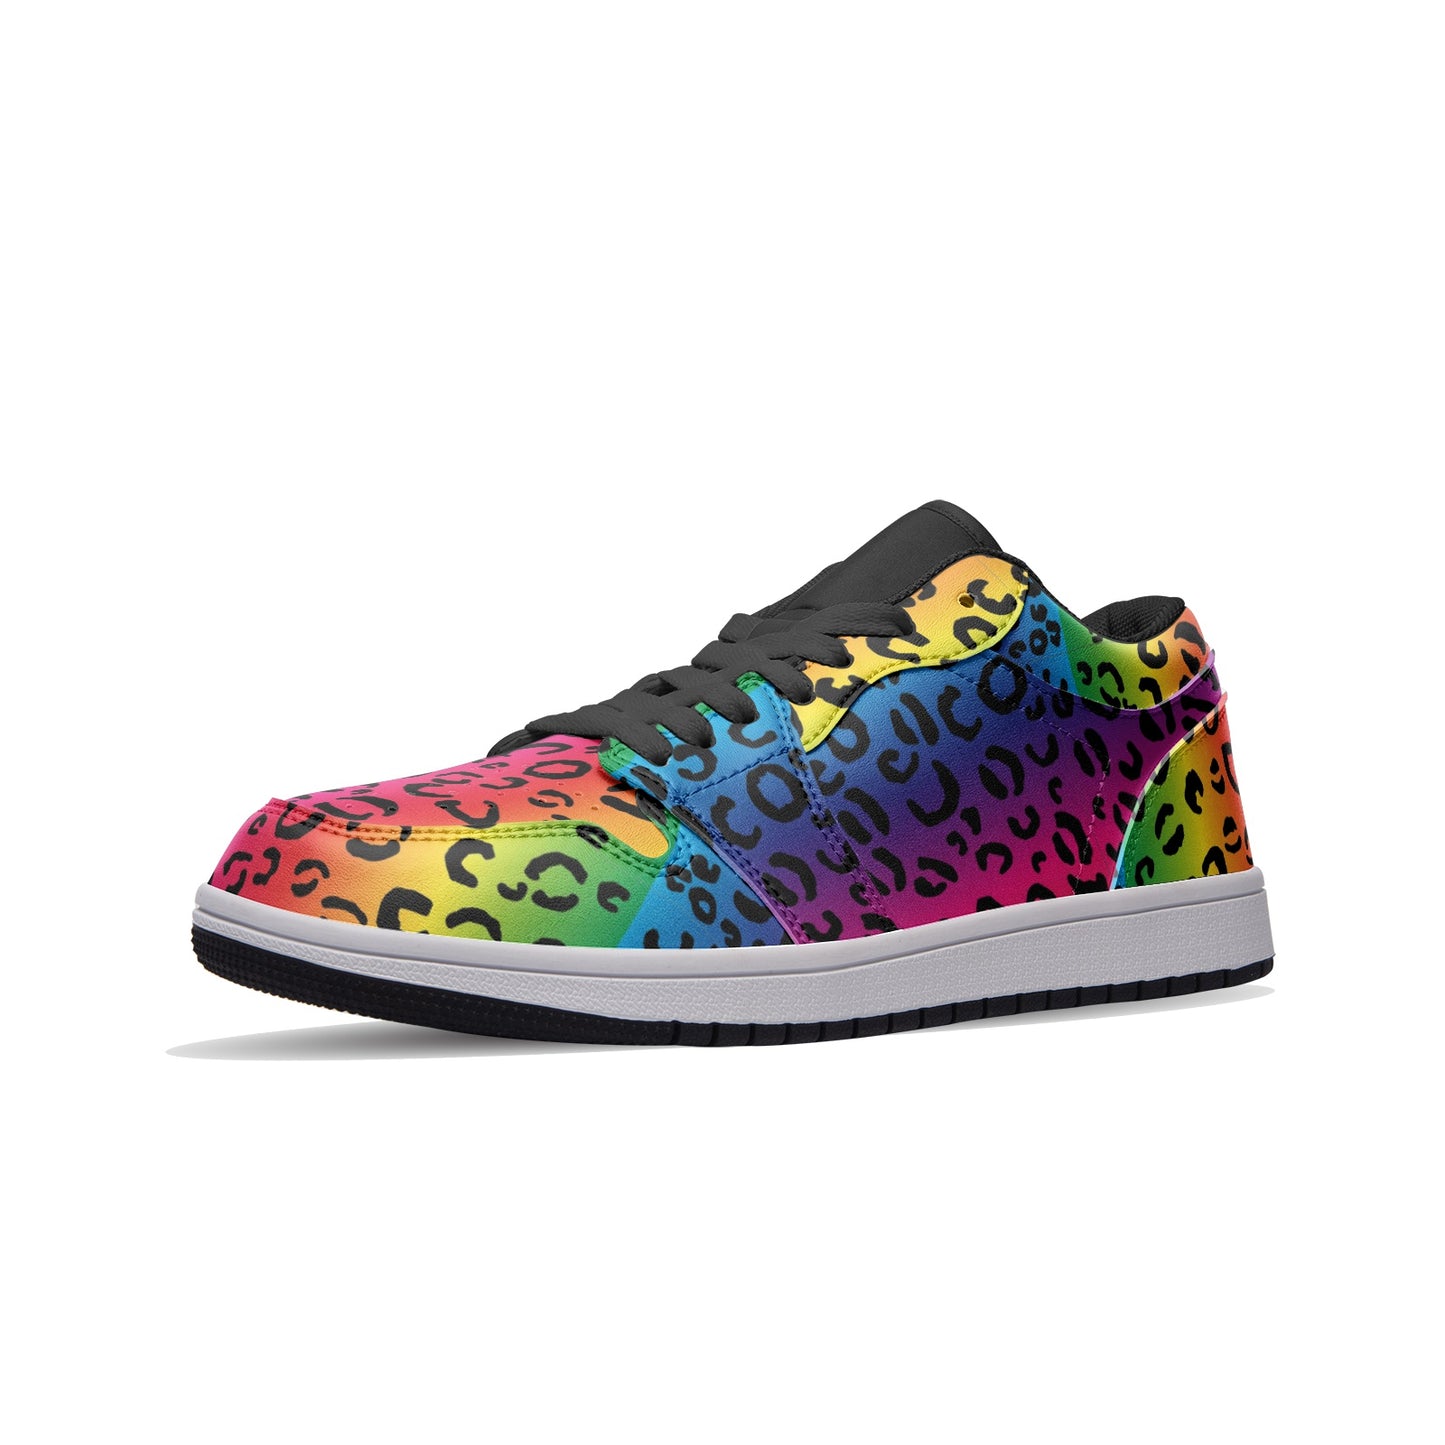 ATHLETIC LEATHER SNEAKERS - Multi-color